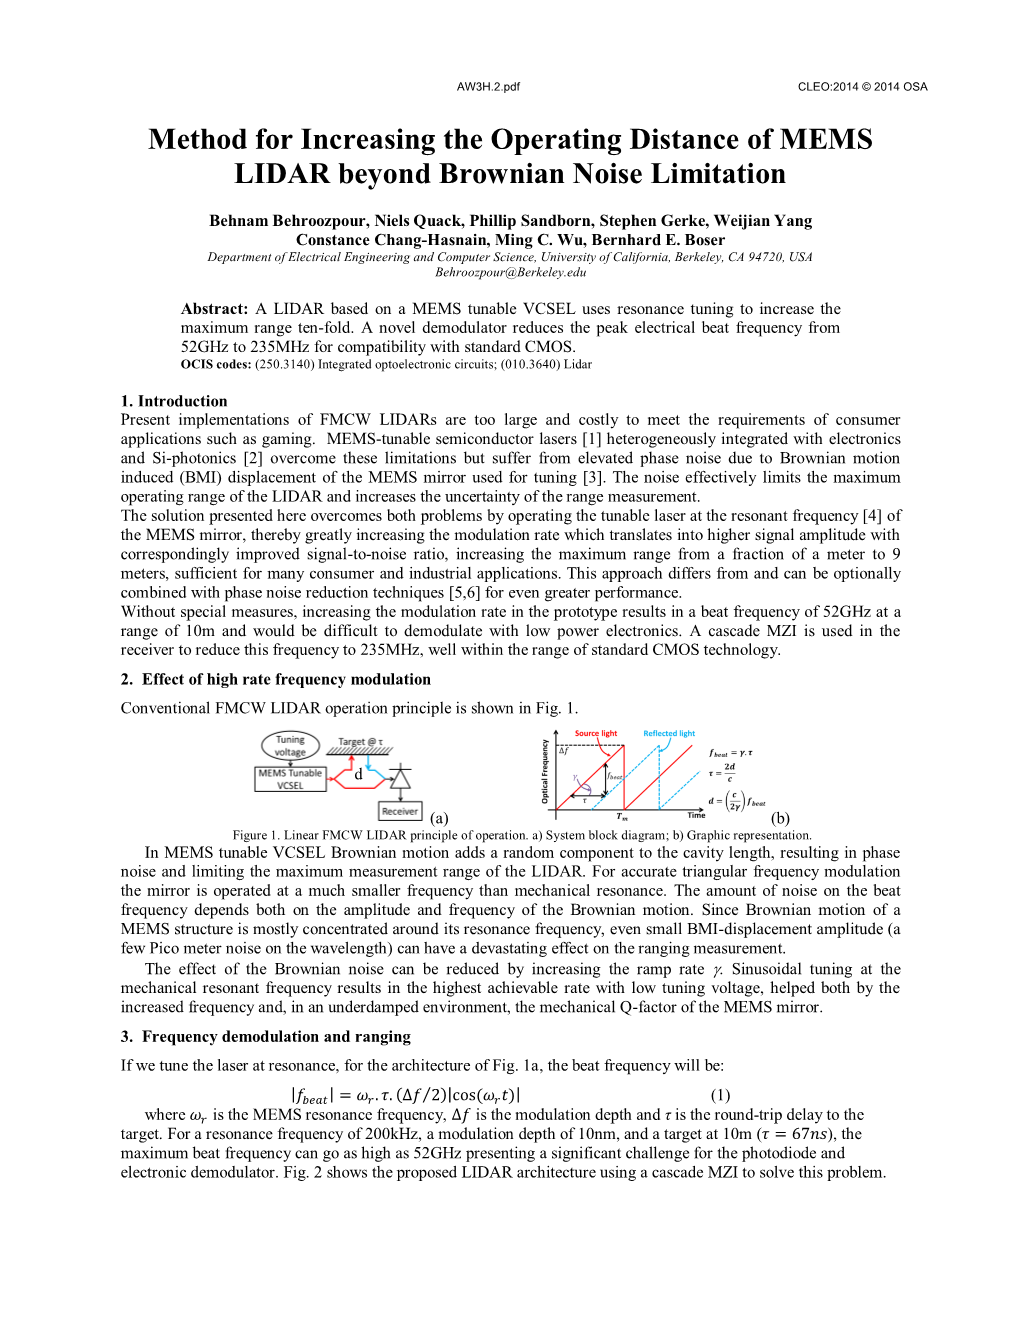 Method for Increasing the Operating Distance of MEMS LIDAR Beyond Brownian Noise Limitation